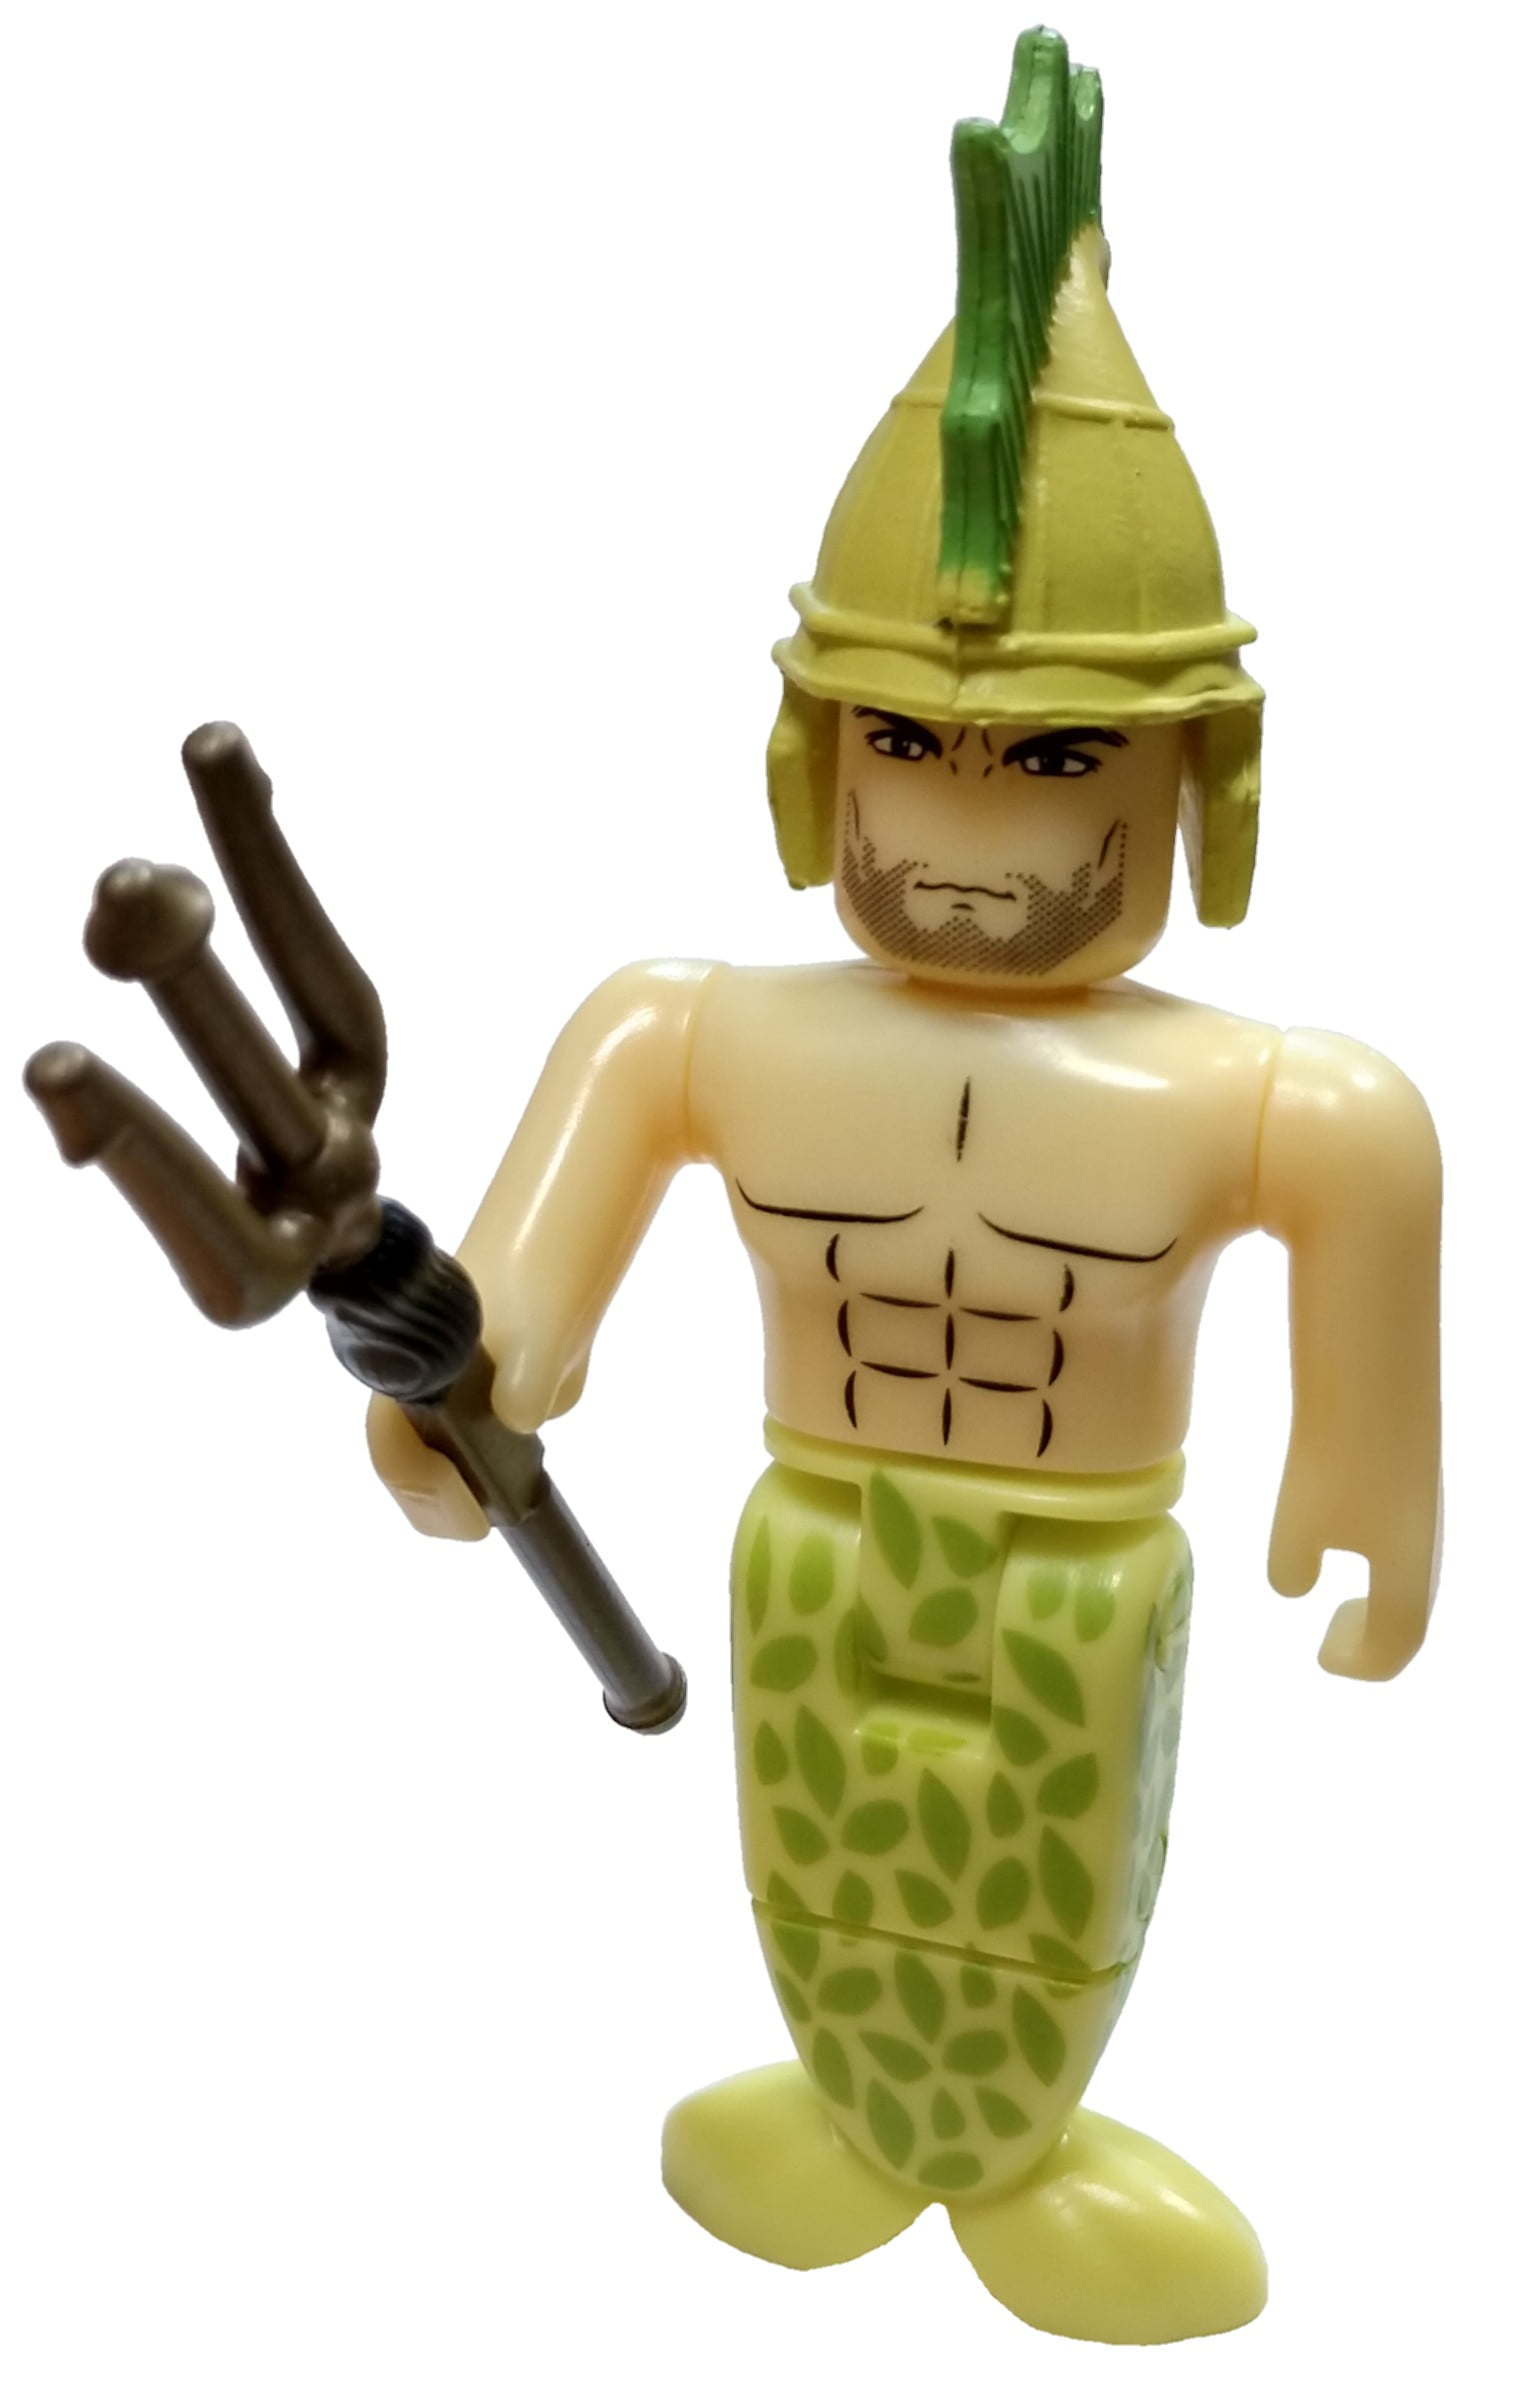 Roblox Red Series 4 Neverland Lagoon Epic Merman Mini Figure With Red Cube And Online Code No Packaging Walmart Com Walmart Com - neverland lagoon roblox toy